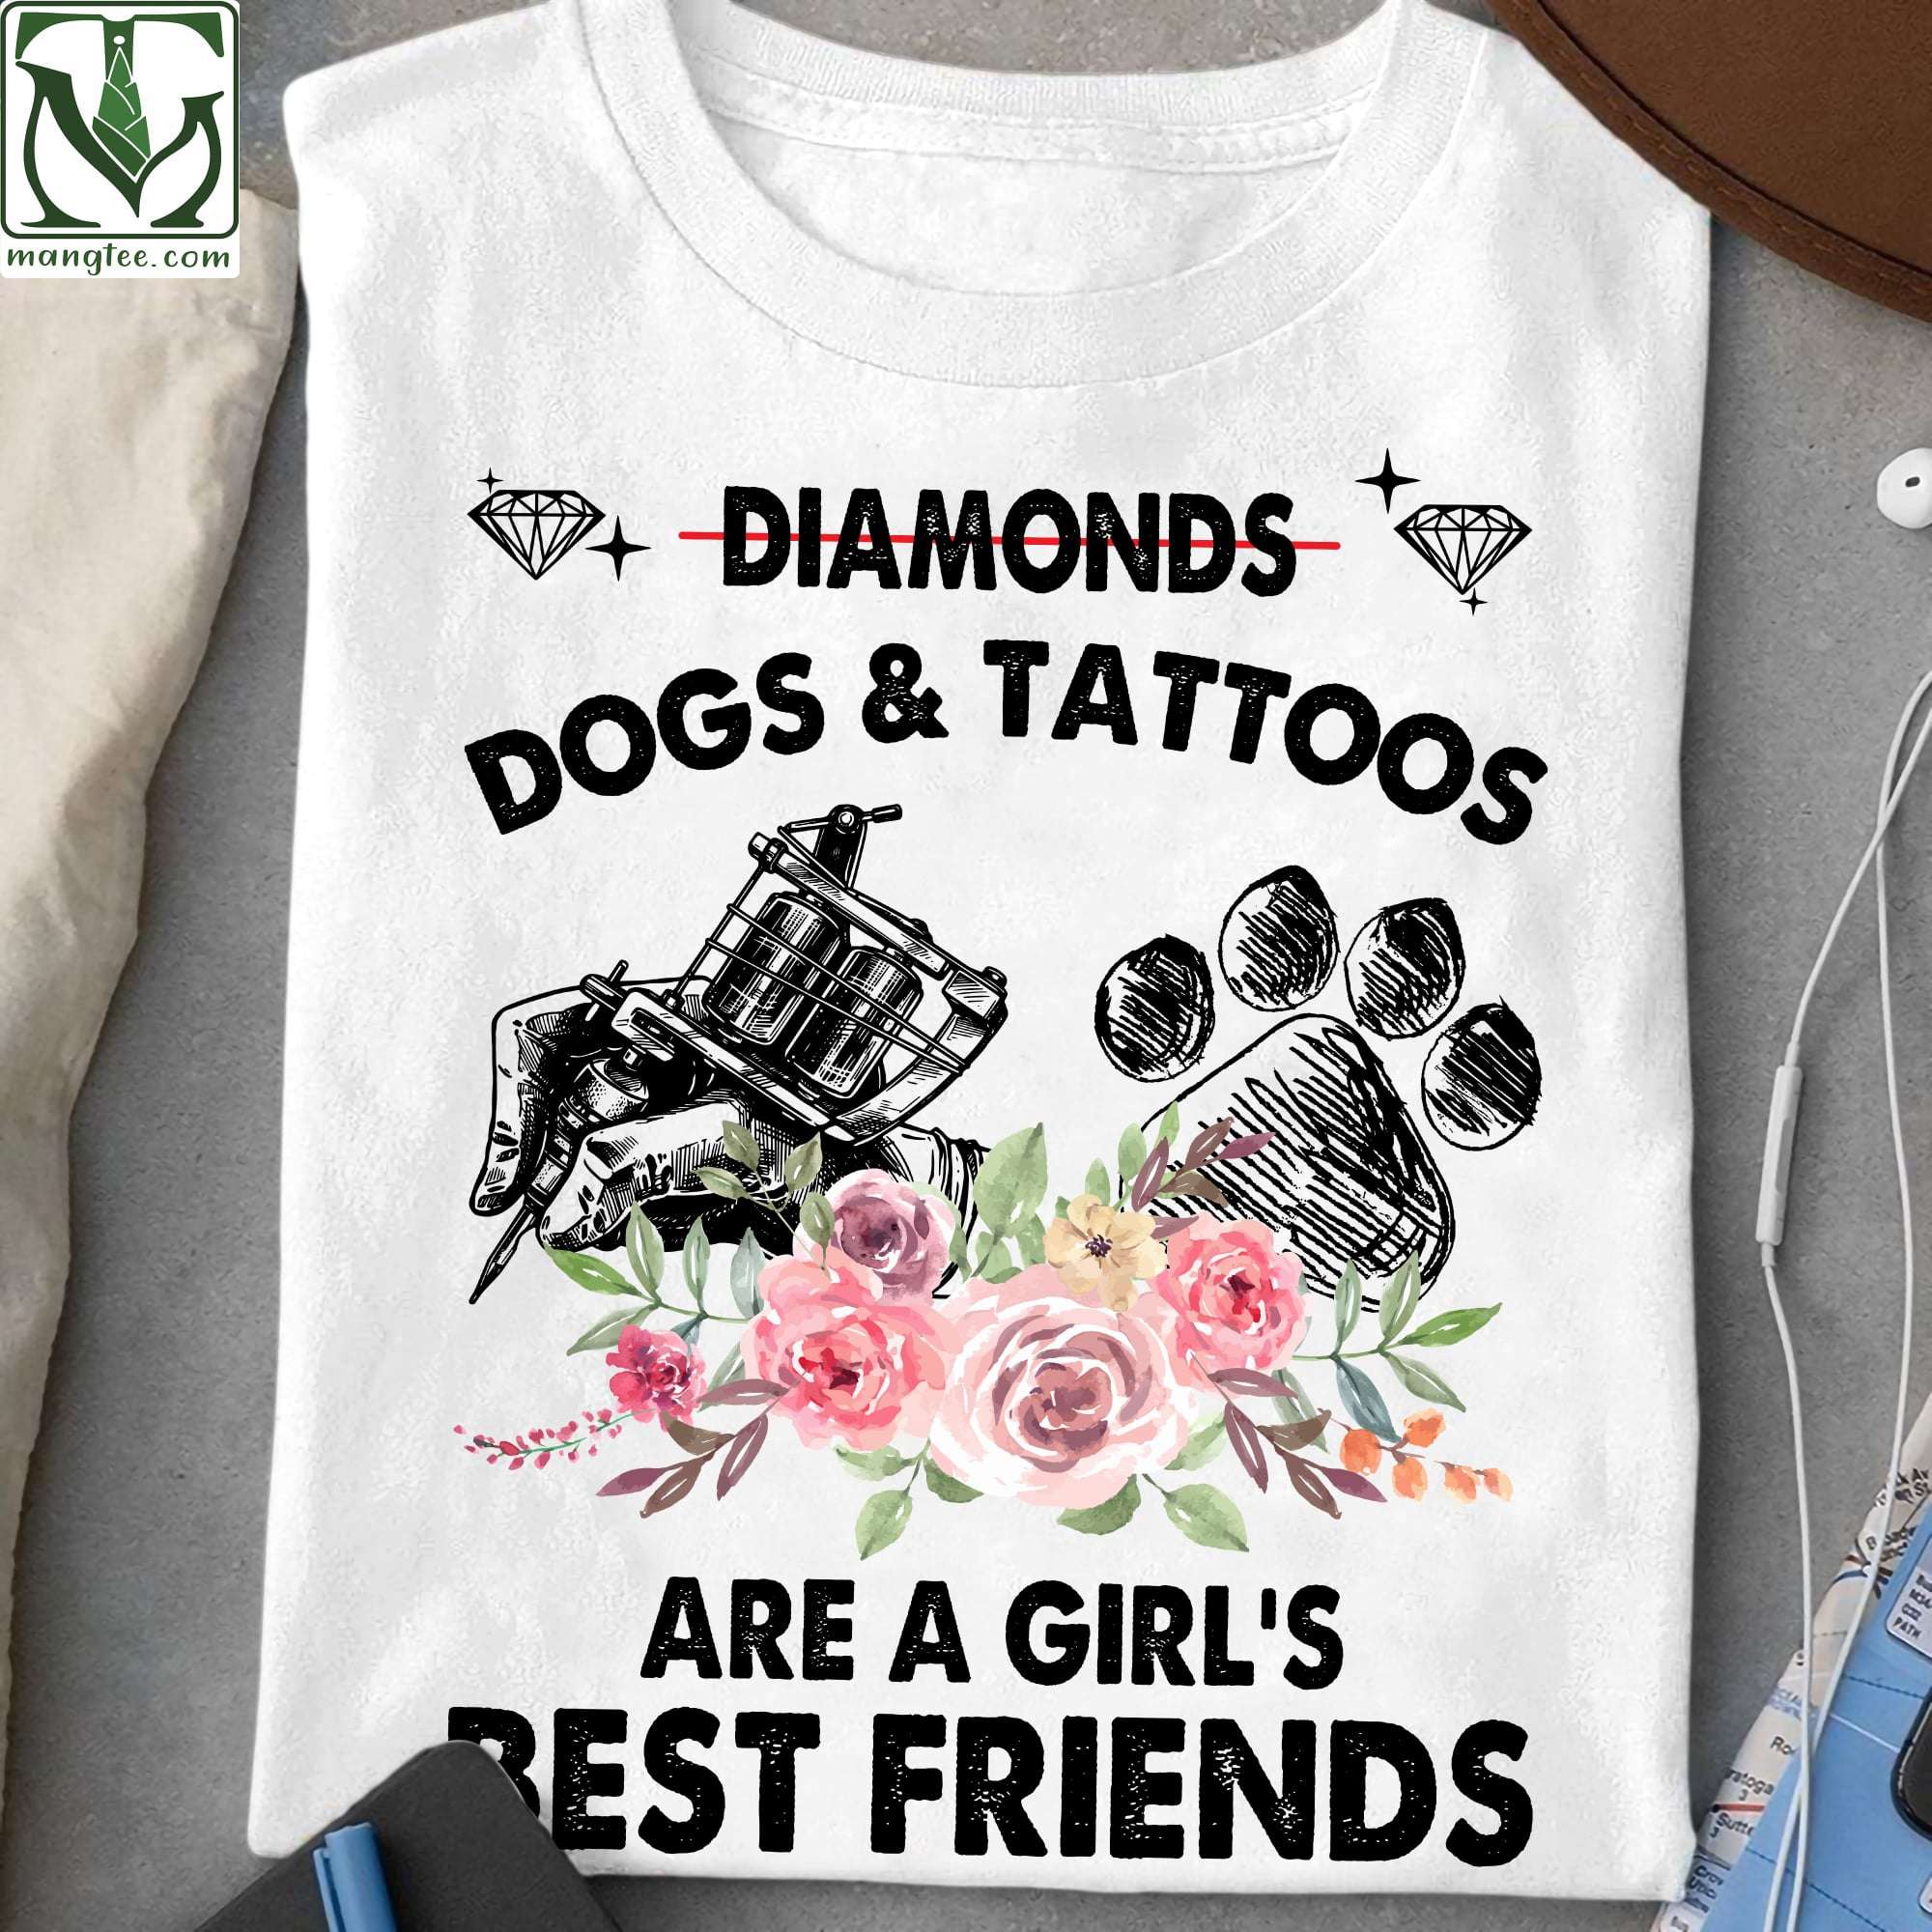 Dogs and tattoos are a girl's best friends - Girls love dogs and tattoos